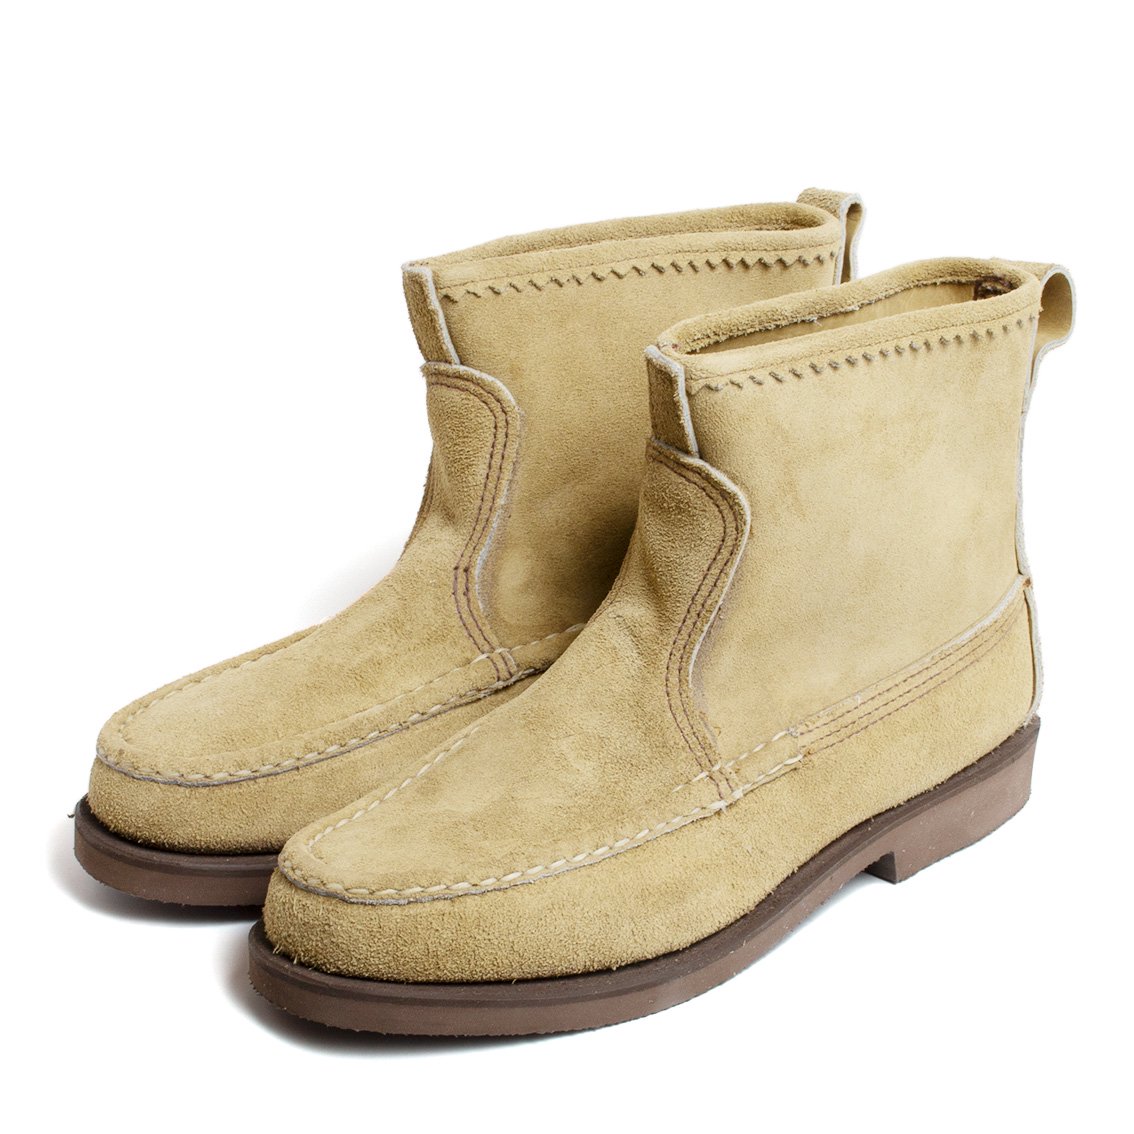 RUSSELL MOCCASIN / ラッセルモカシン] Knock-A-Bout Boot